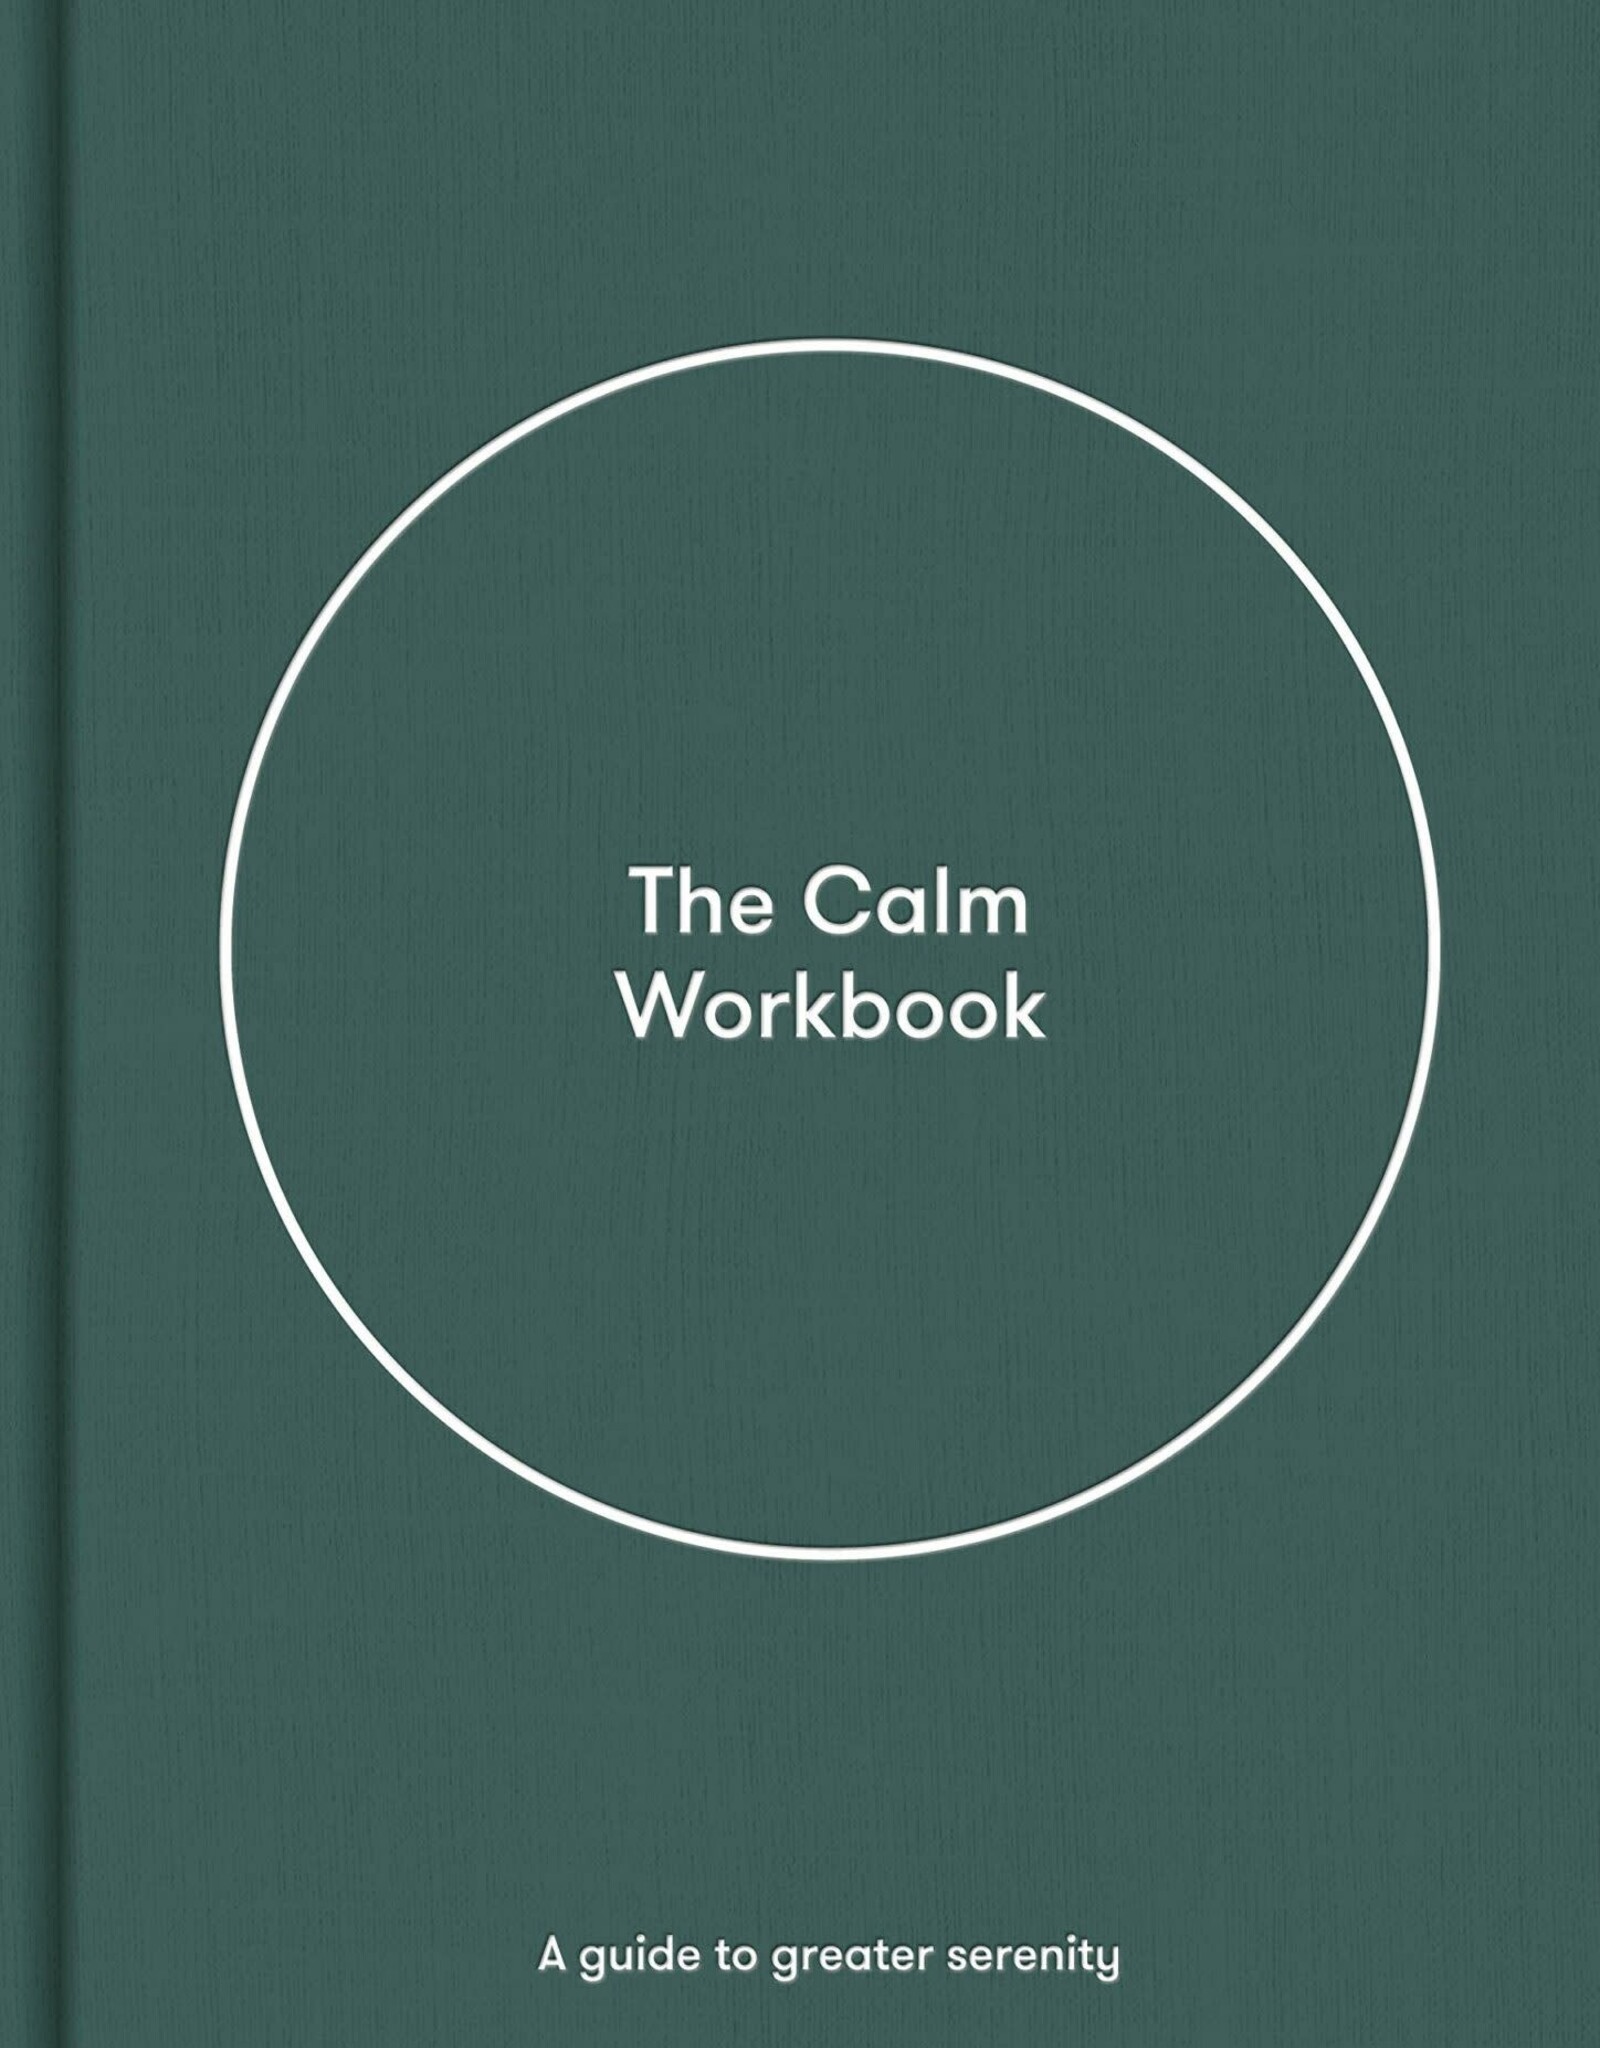 New Mags New Mags - The calm workbook